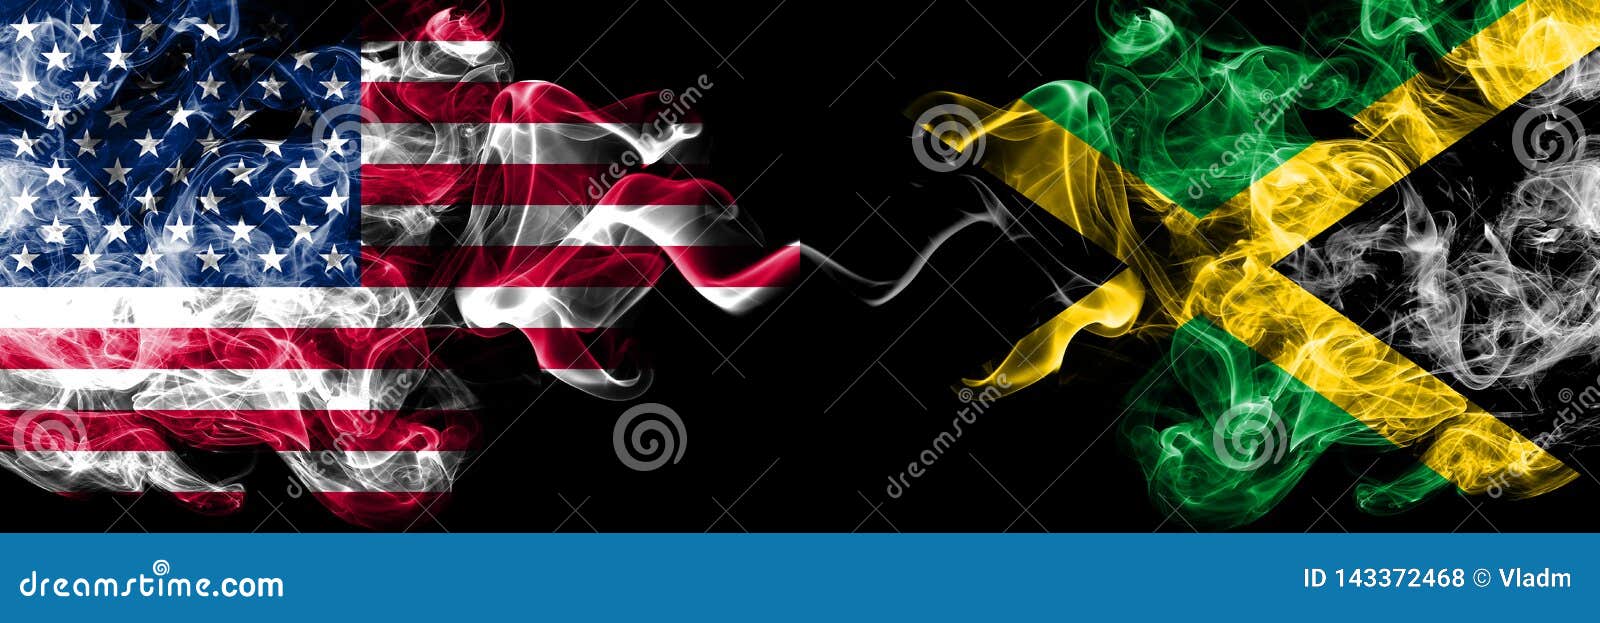 united states of america vs jamaica, jamaican smoky mystic flags placed side by side. thick colored silky smoke flags of america